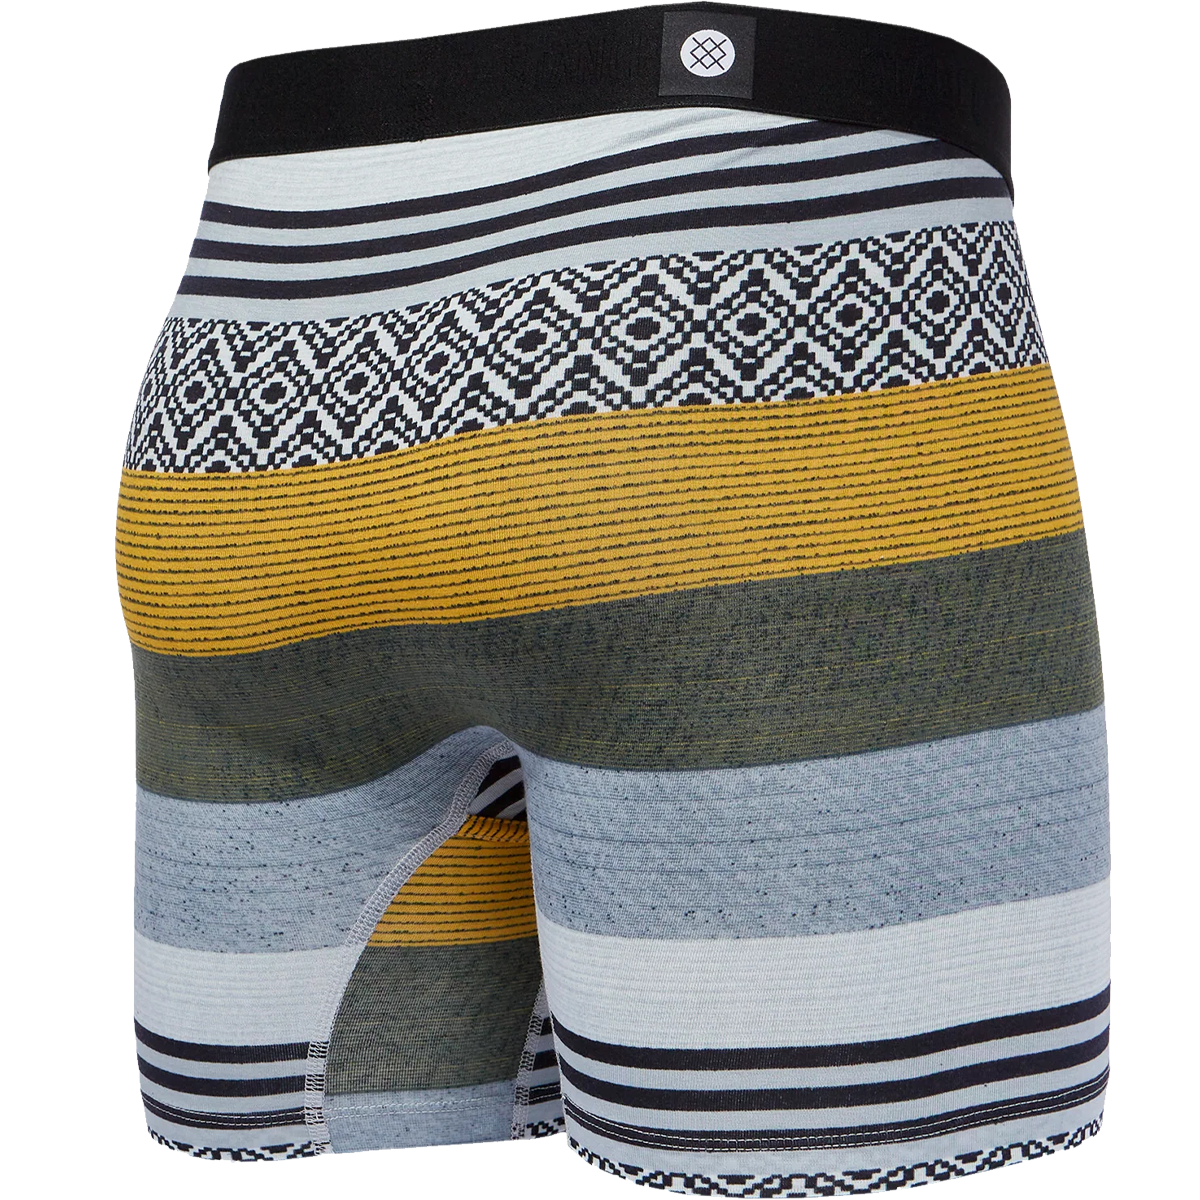 Anza Boxer Brief with Wholester alternate view